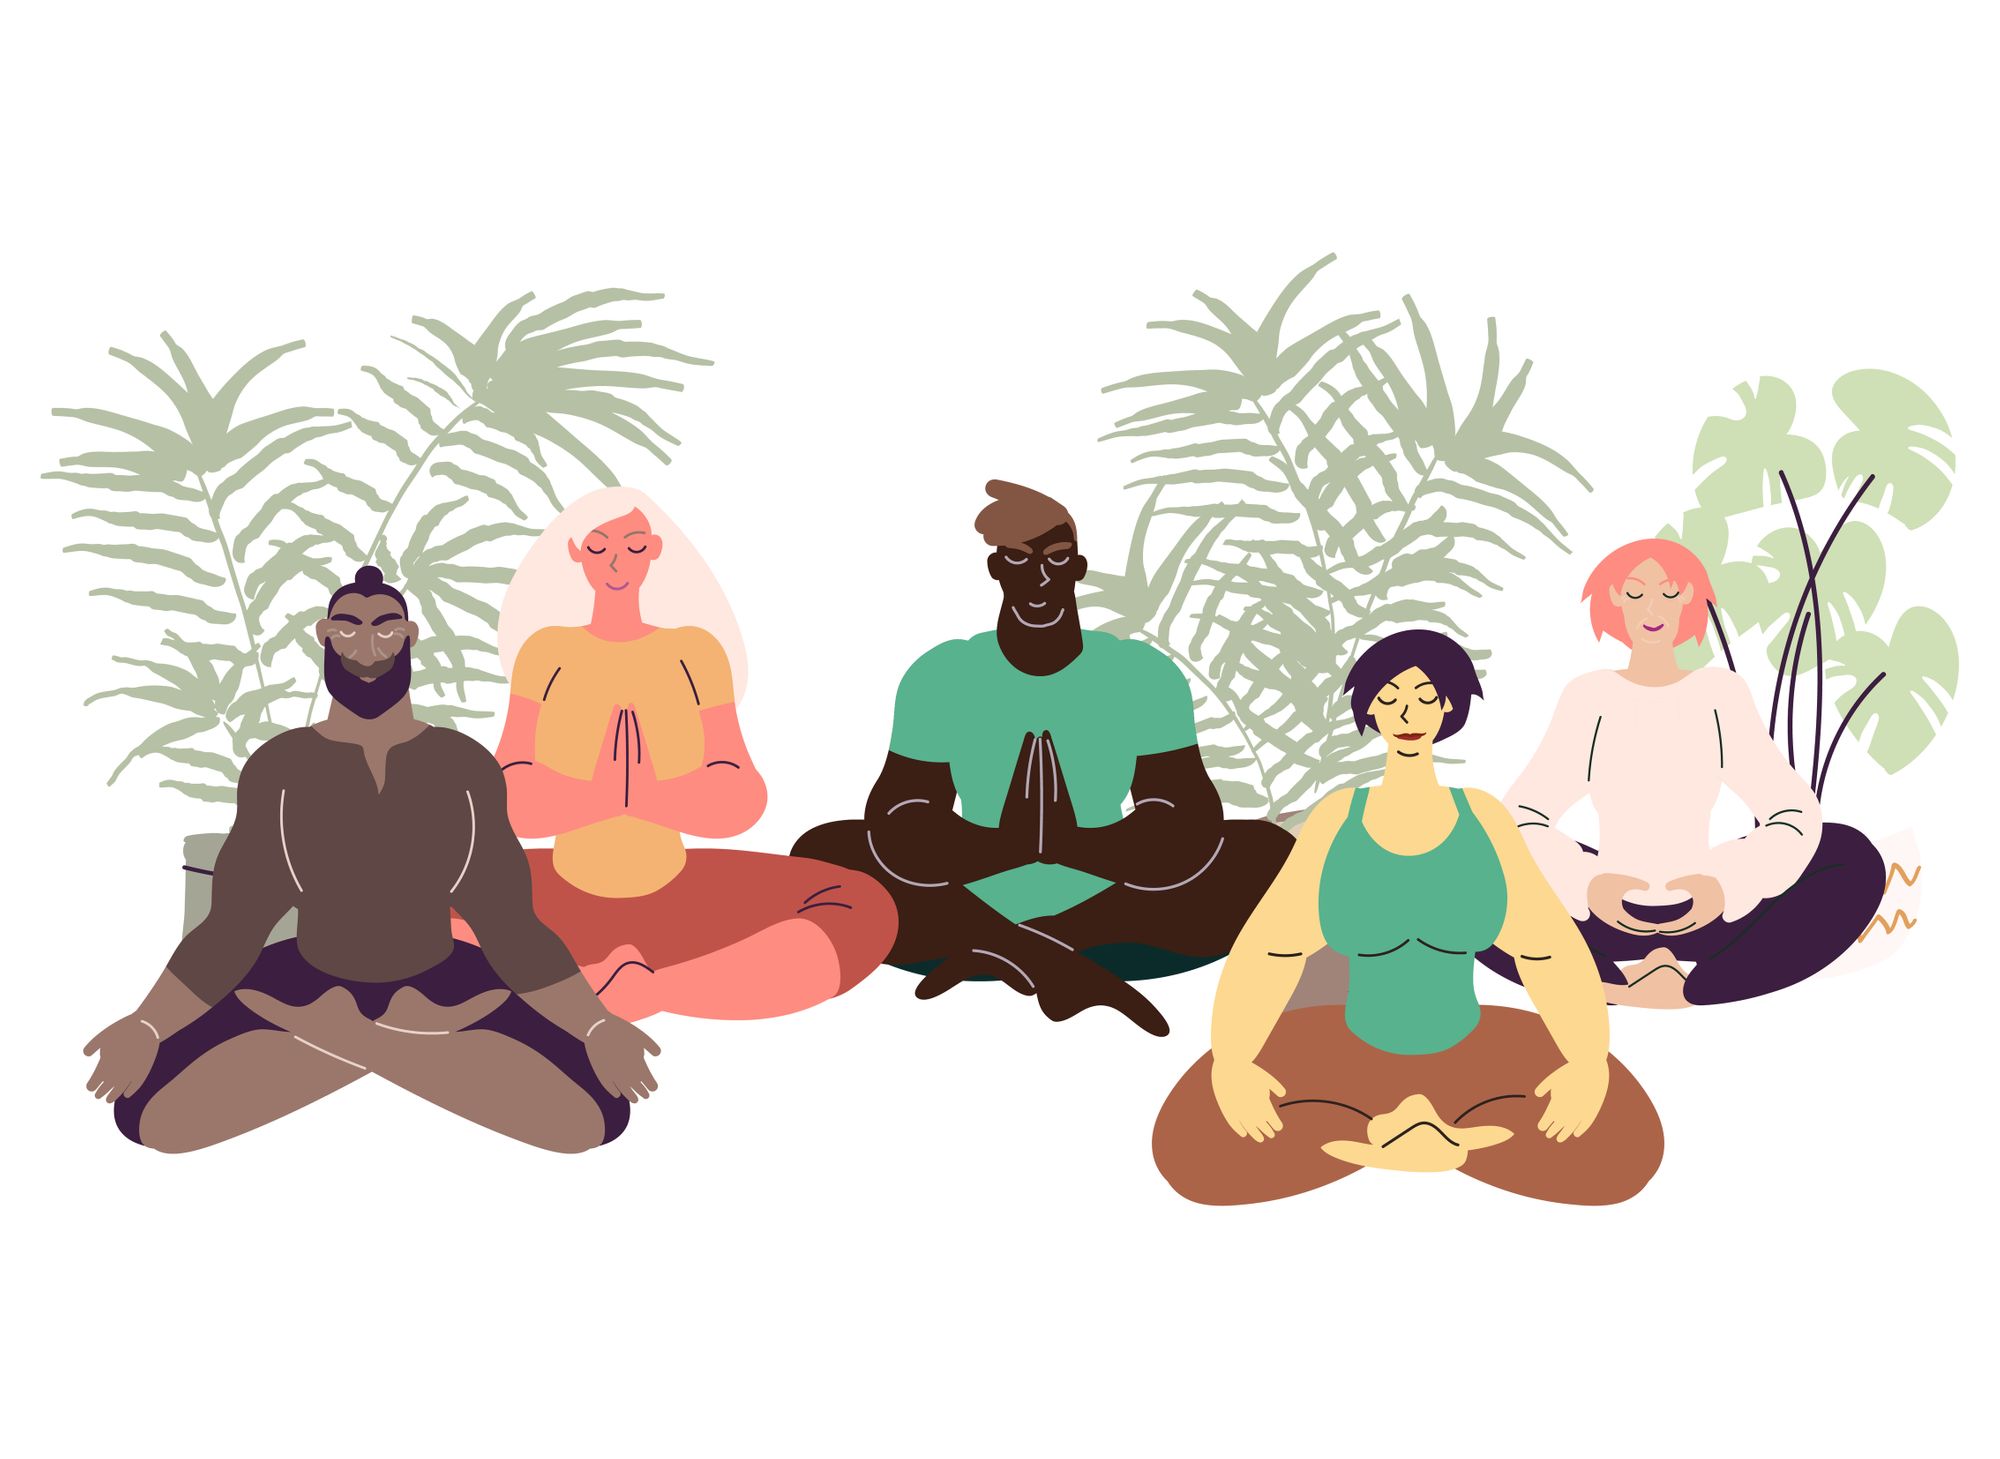 How To Build More Inclusive Mindfulness Spaces: An Interview with Dr. Tushar Bhagat